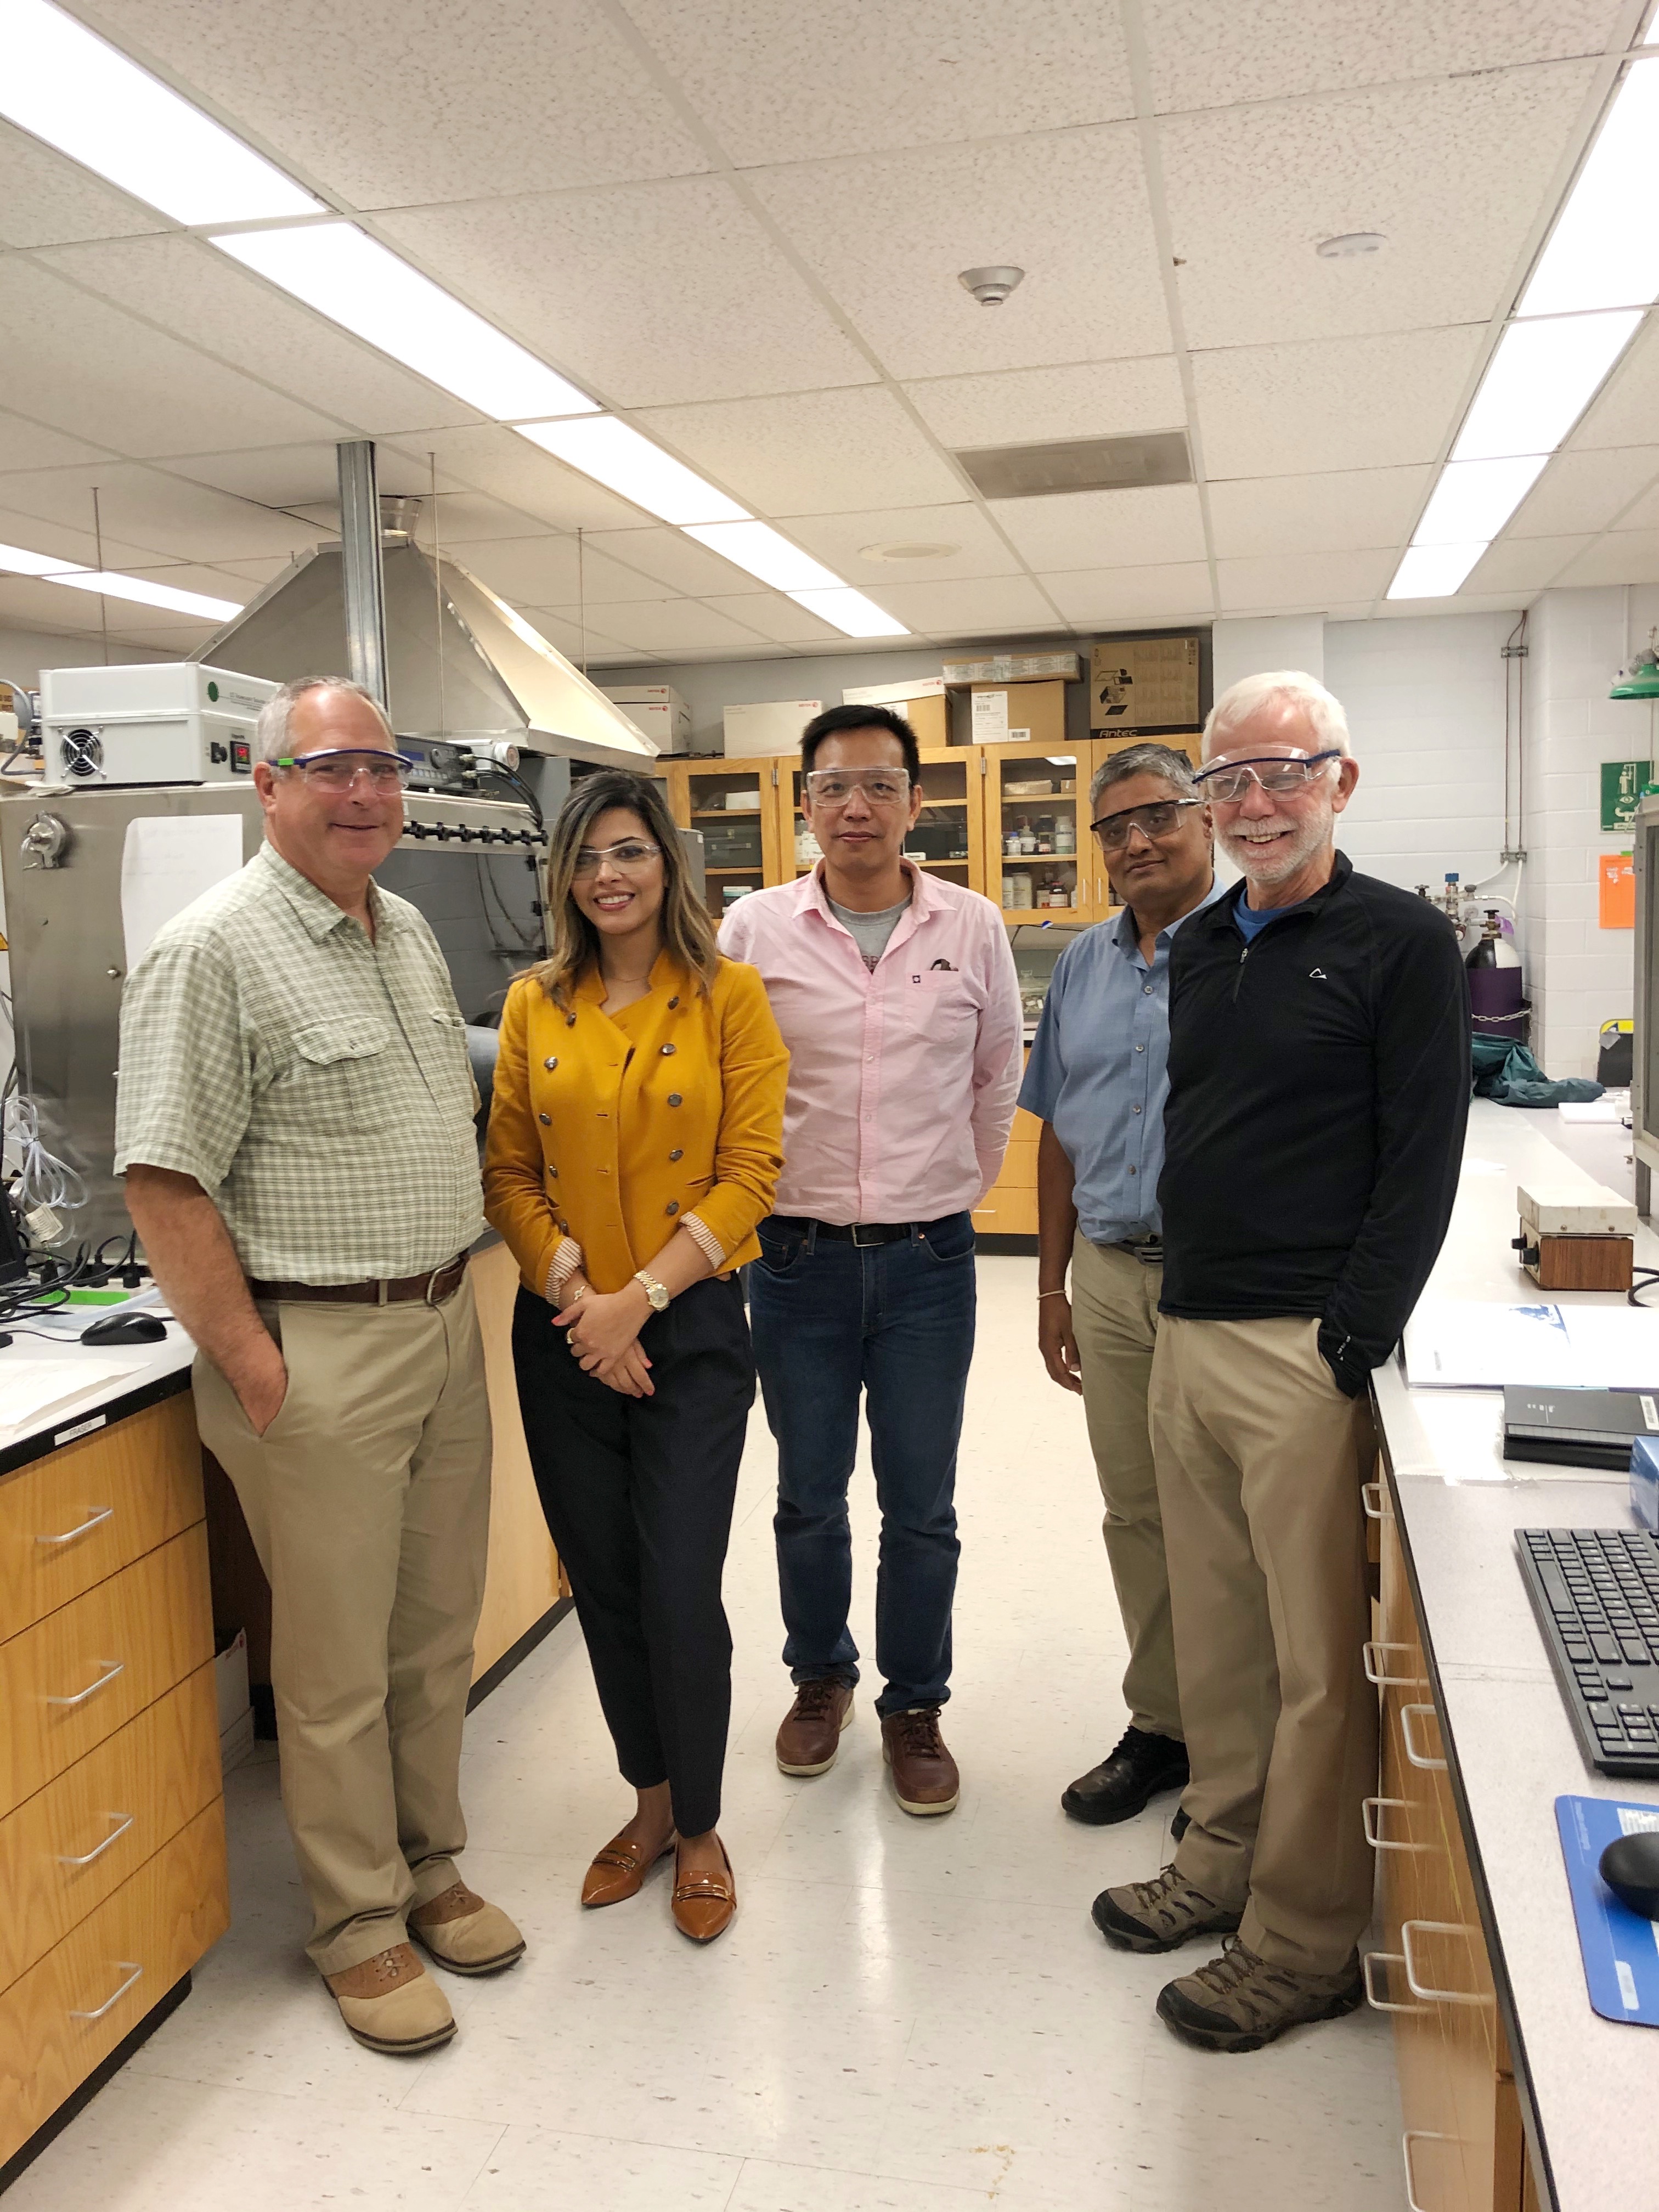 From left: Dr. Jamie Noel, Dr. Mehran Behazin, Dr. Tung Yuan (Romeo) Yung, Dr. Sridhar Ramamurthy, and Dr. David Shoesmith visiting a corrosion/electrochemistry lab at Western University.